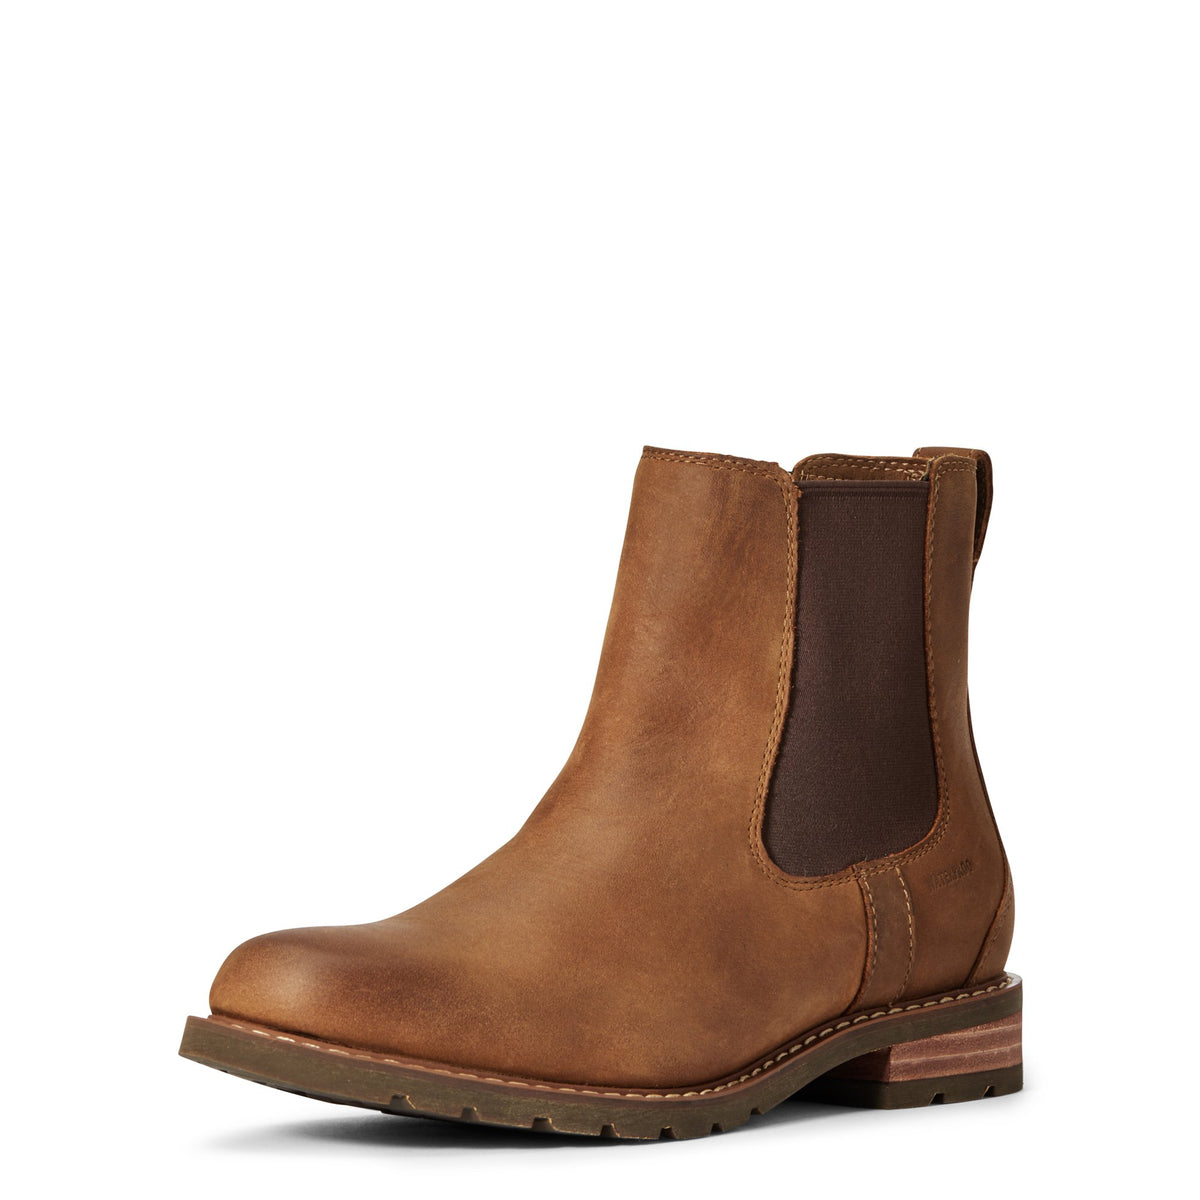 Ariat | Women's Wedxford H2O | Weathered Brown - Outback Traders Australia